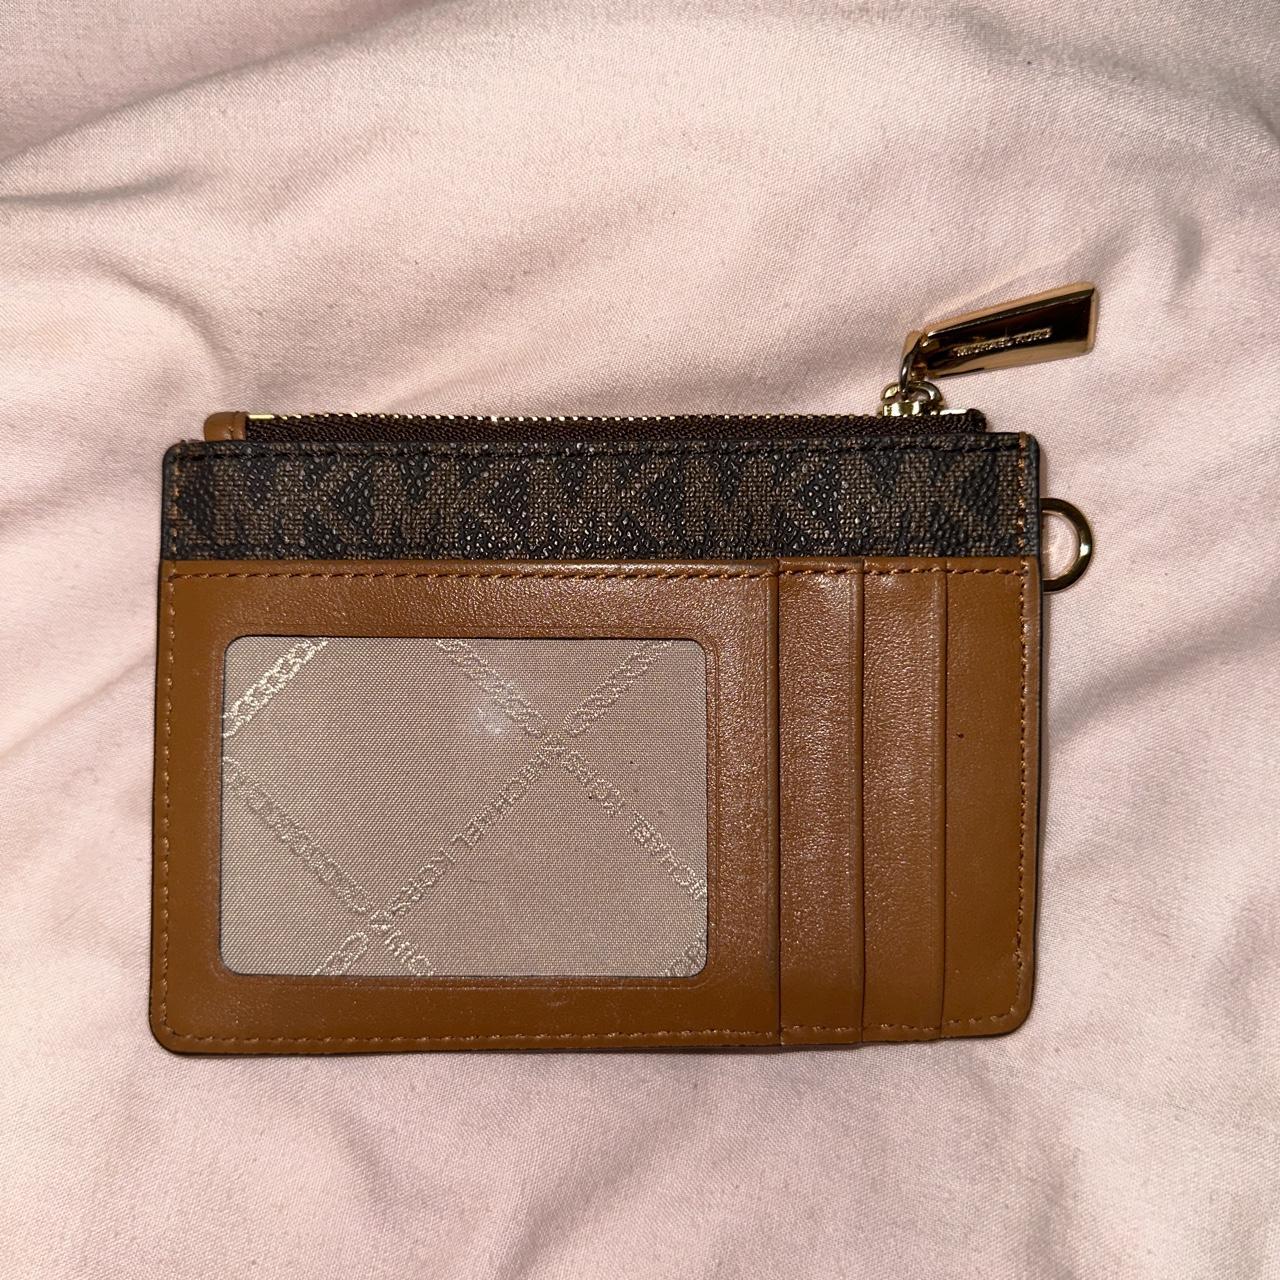 Authentic Michael Kors card holder Free shipping 🩷 - Depop